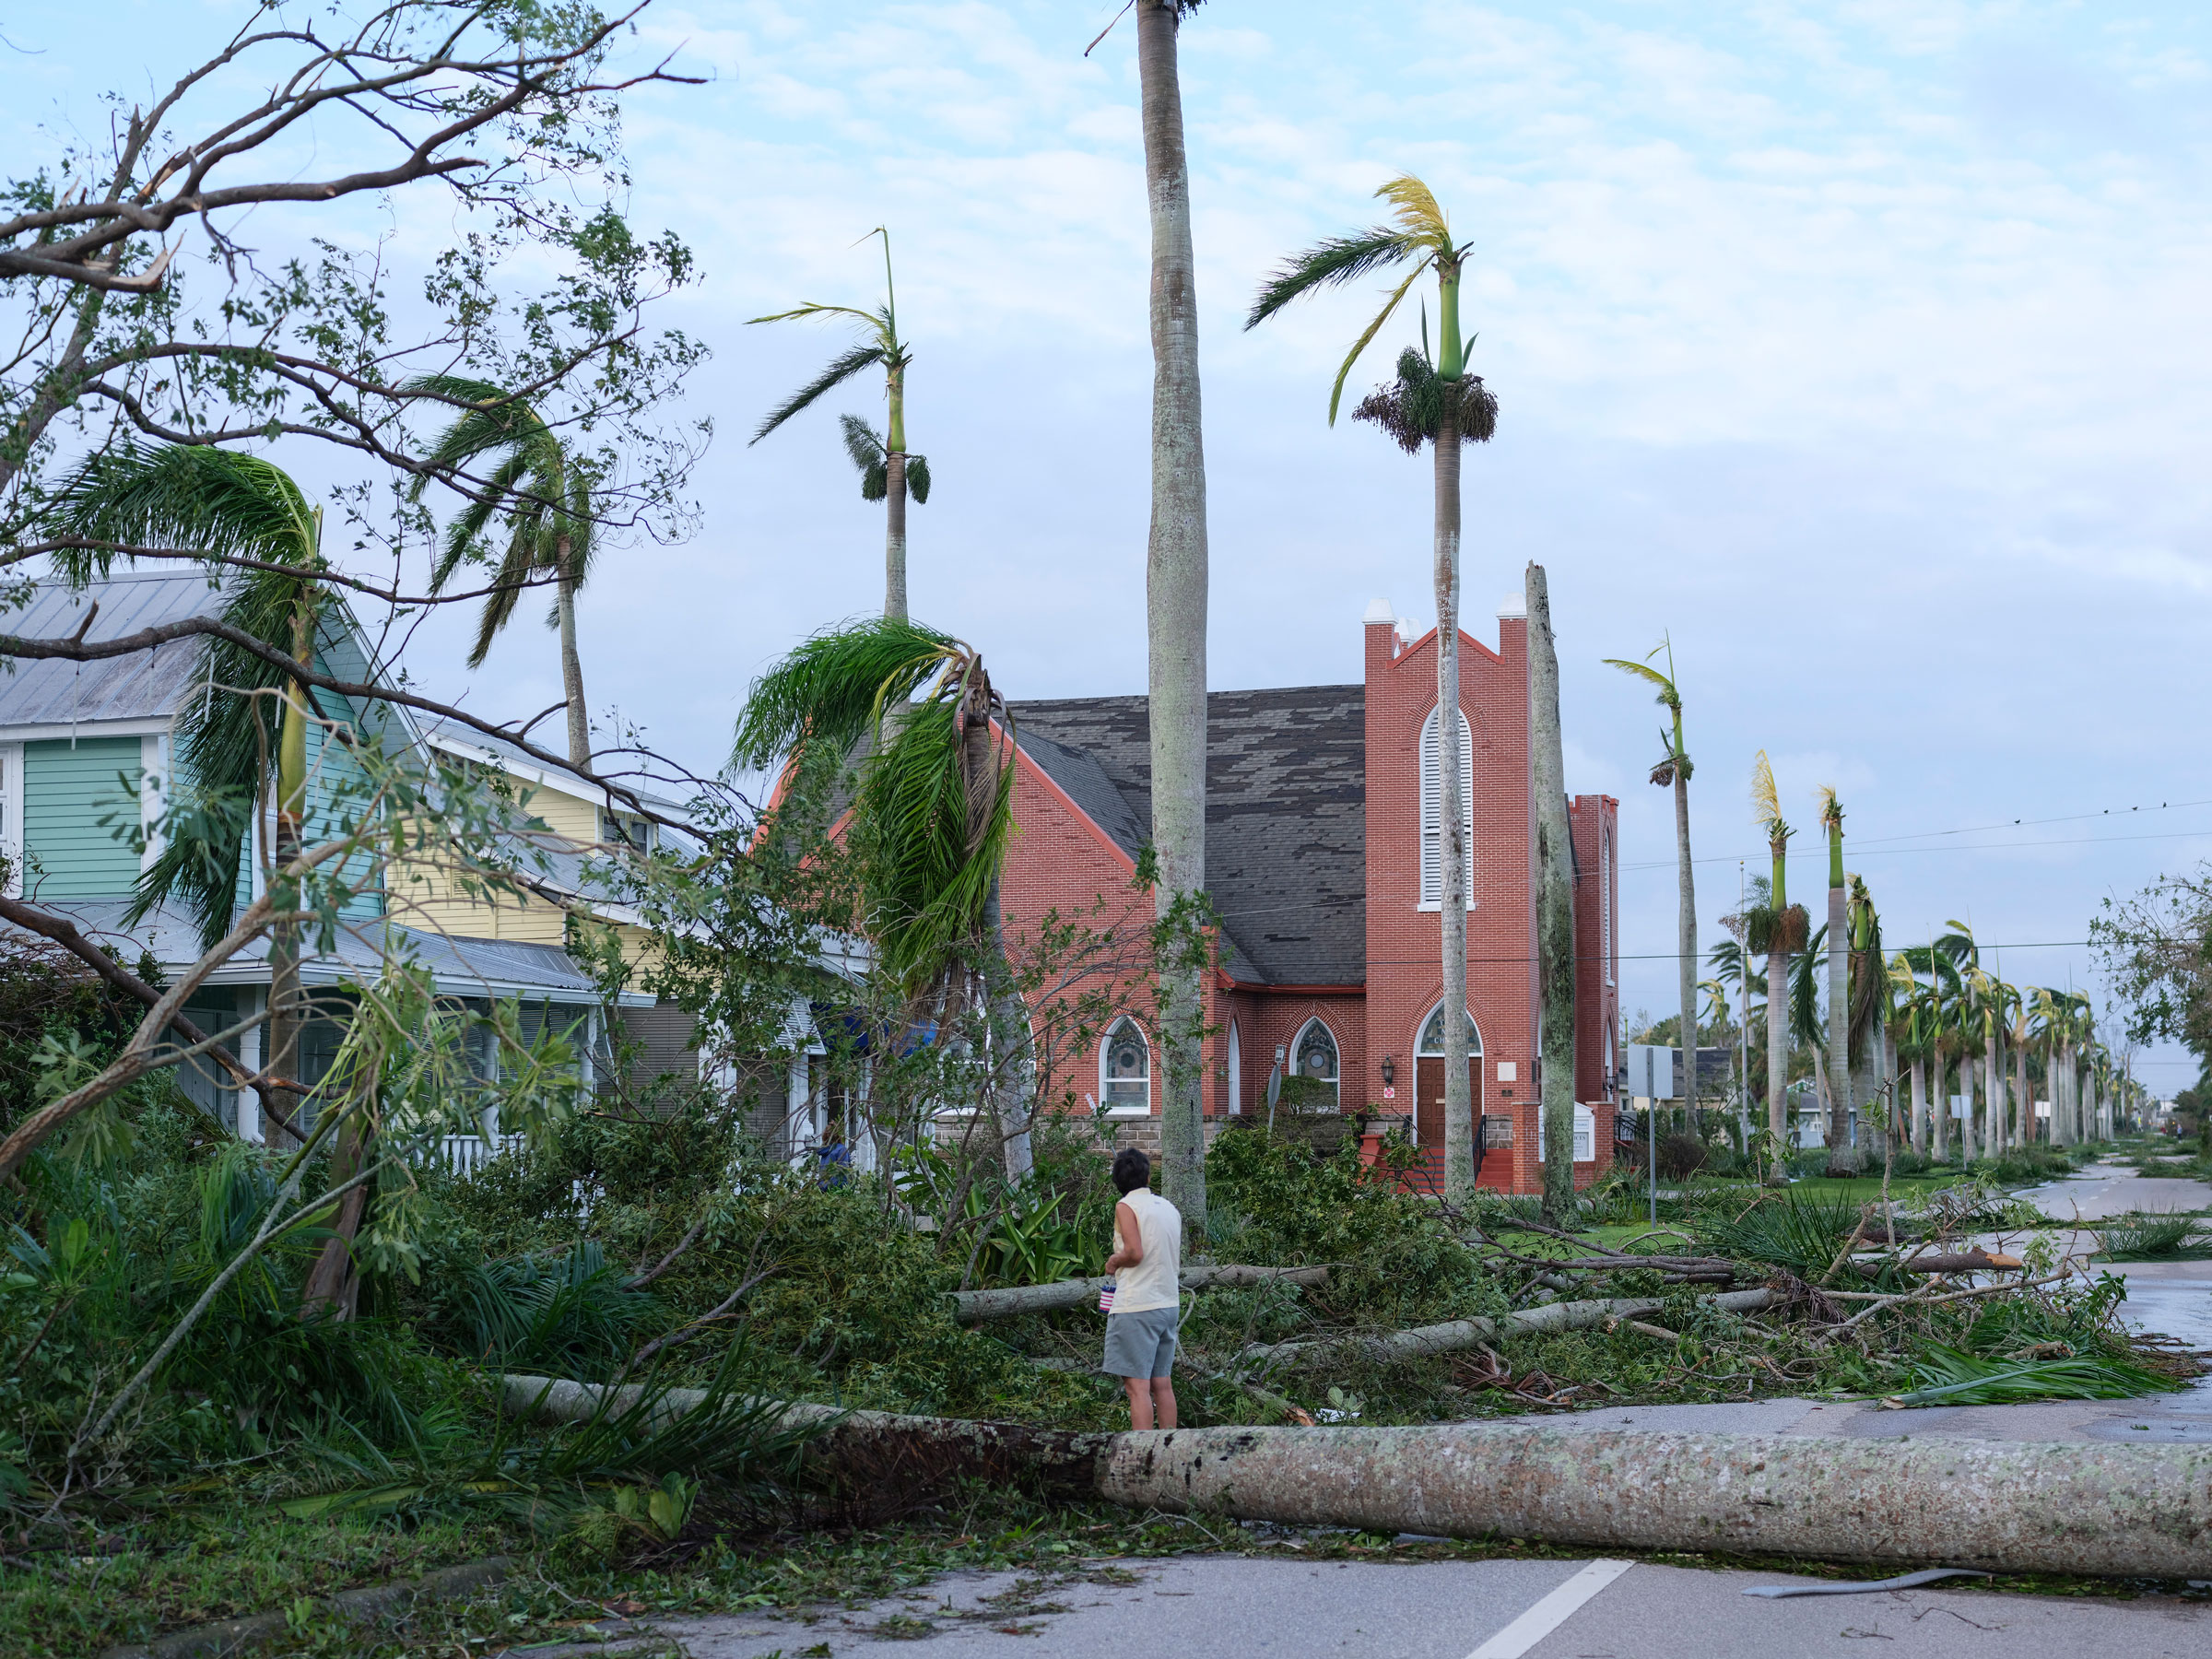 Residents emerge at dawn on Sept. 29, 2022, in downtown Crow Gables, Fla., where trees along the street were toppled by Hurricane Ian. (Christopher Morris for TIME)